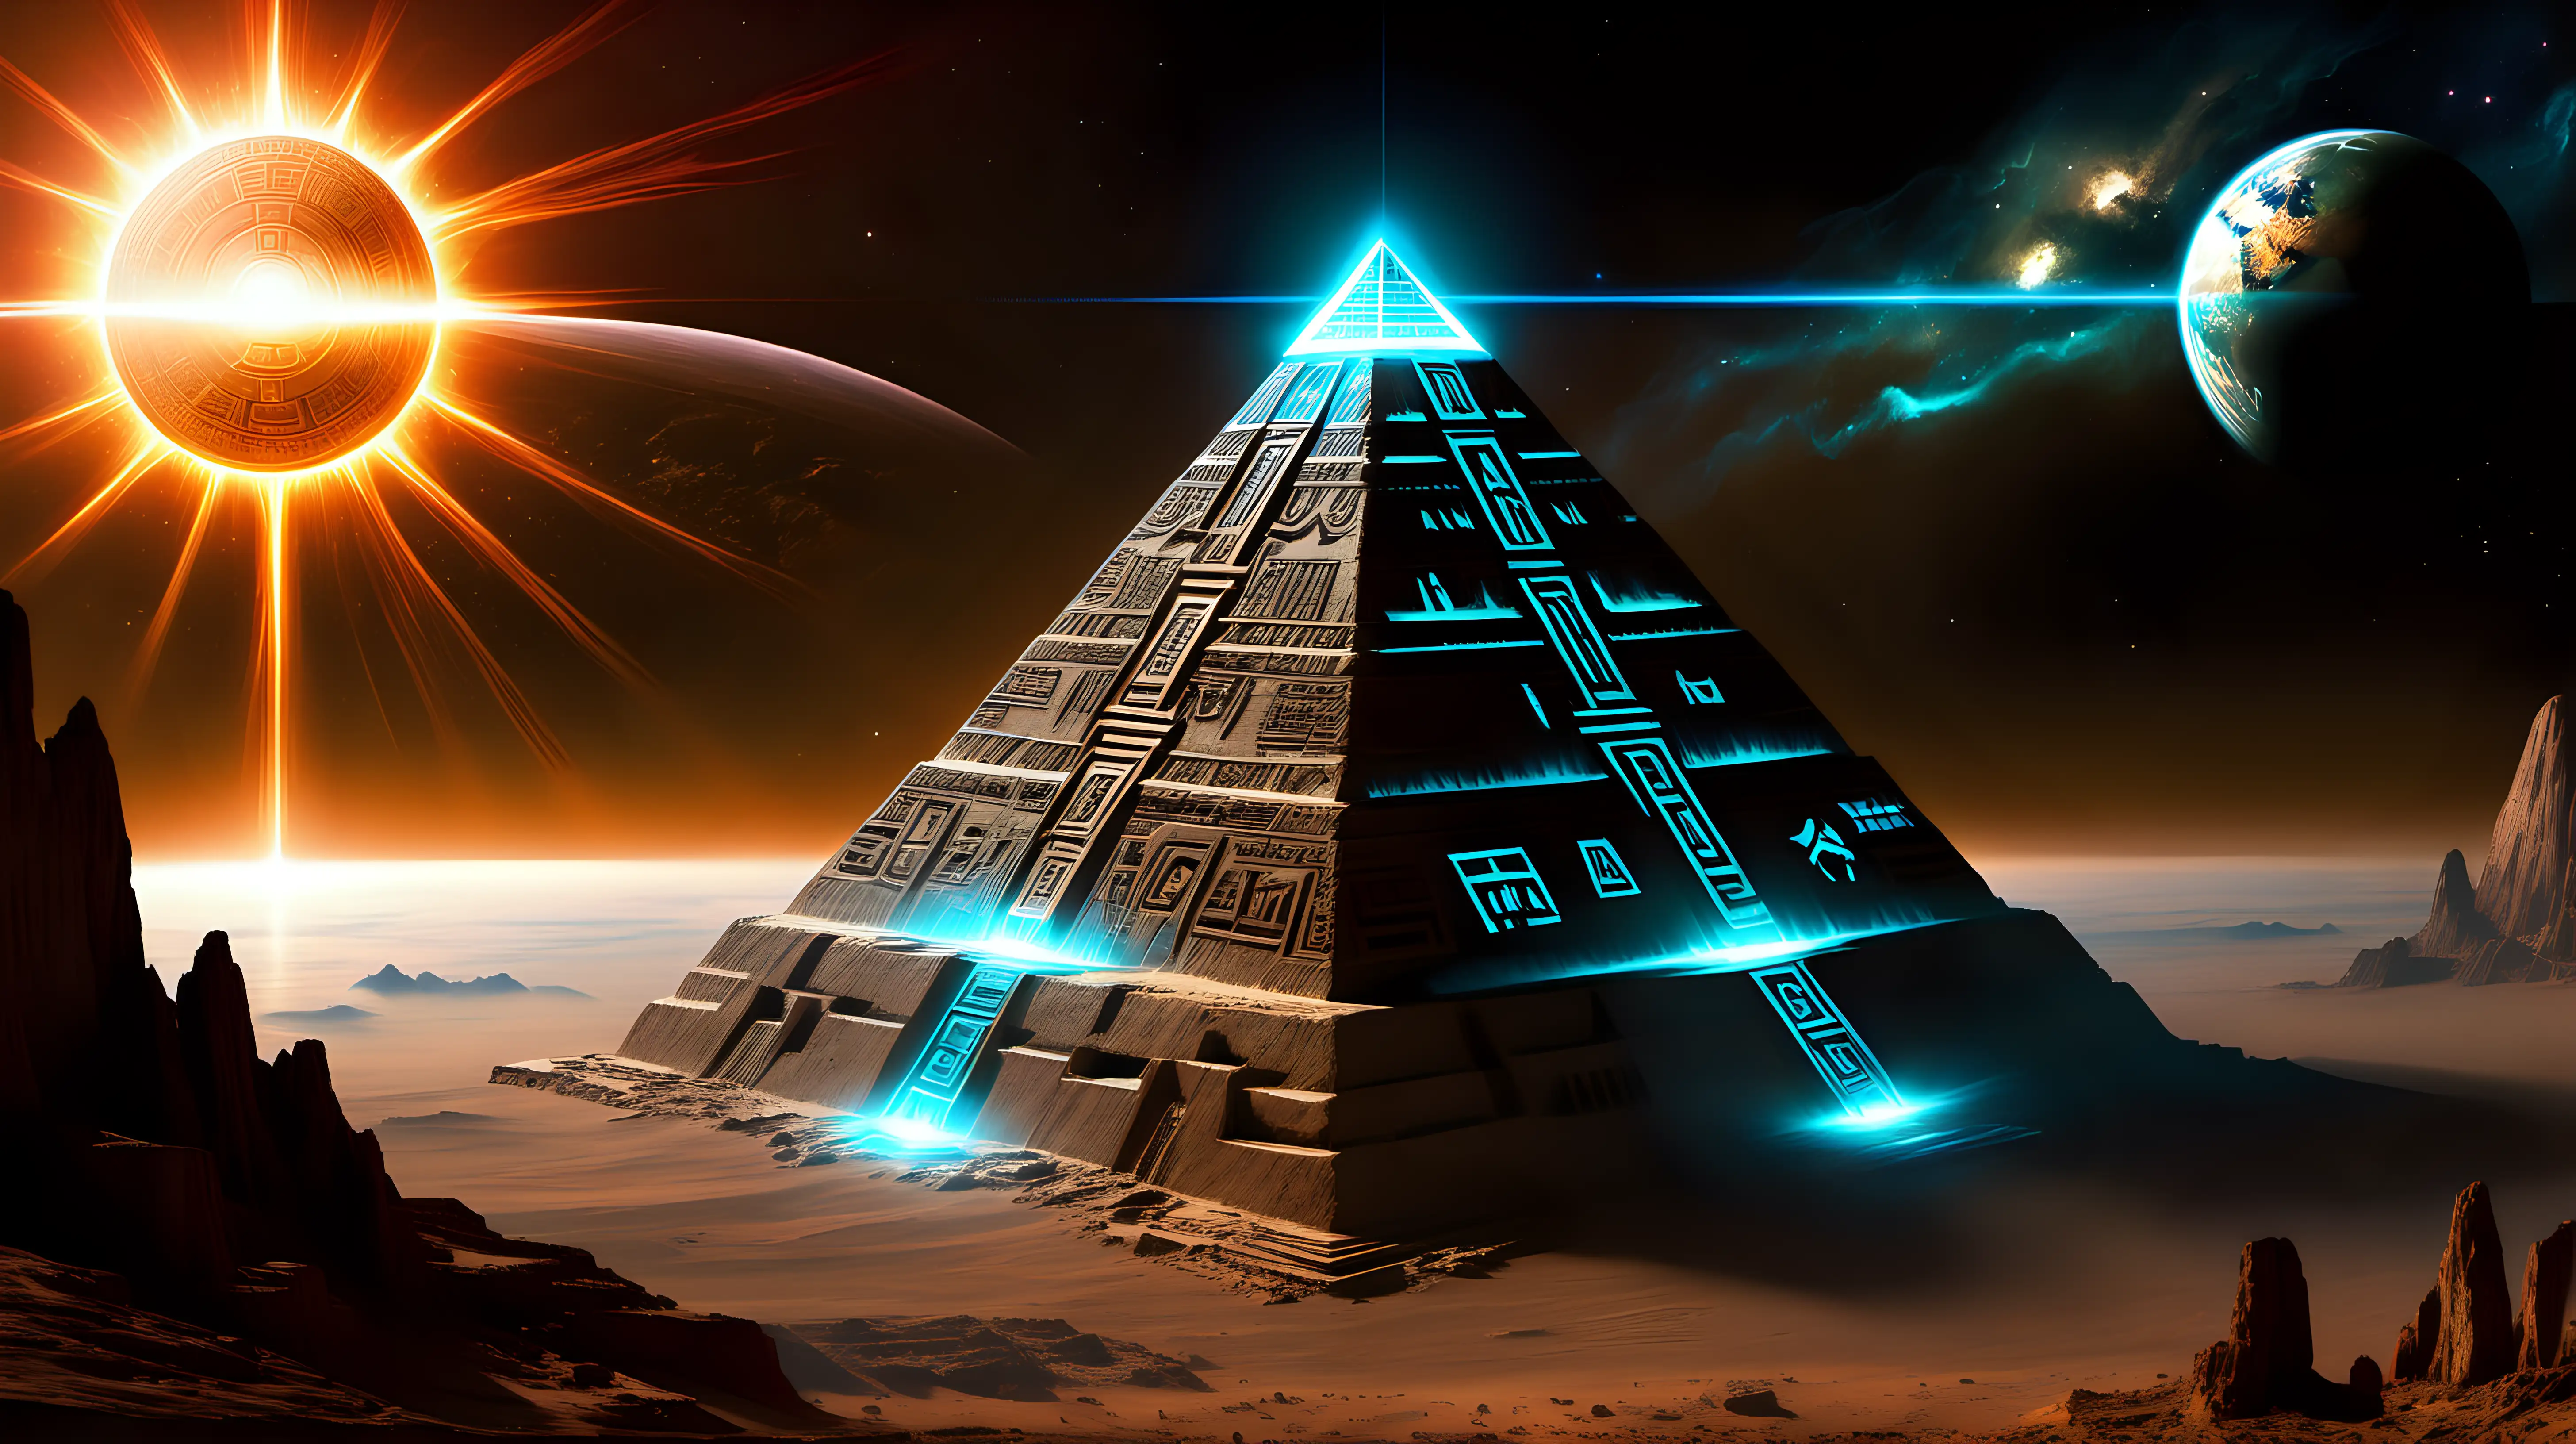 A towering, pyramid-shaped alien vessel adorned with glowing hieroglyphic symbols, emanating an otherworldly energy as it descends towards the planet.